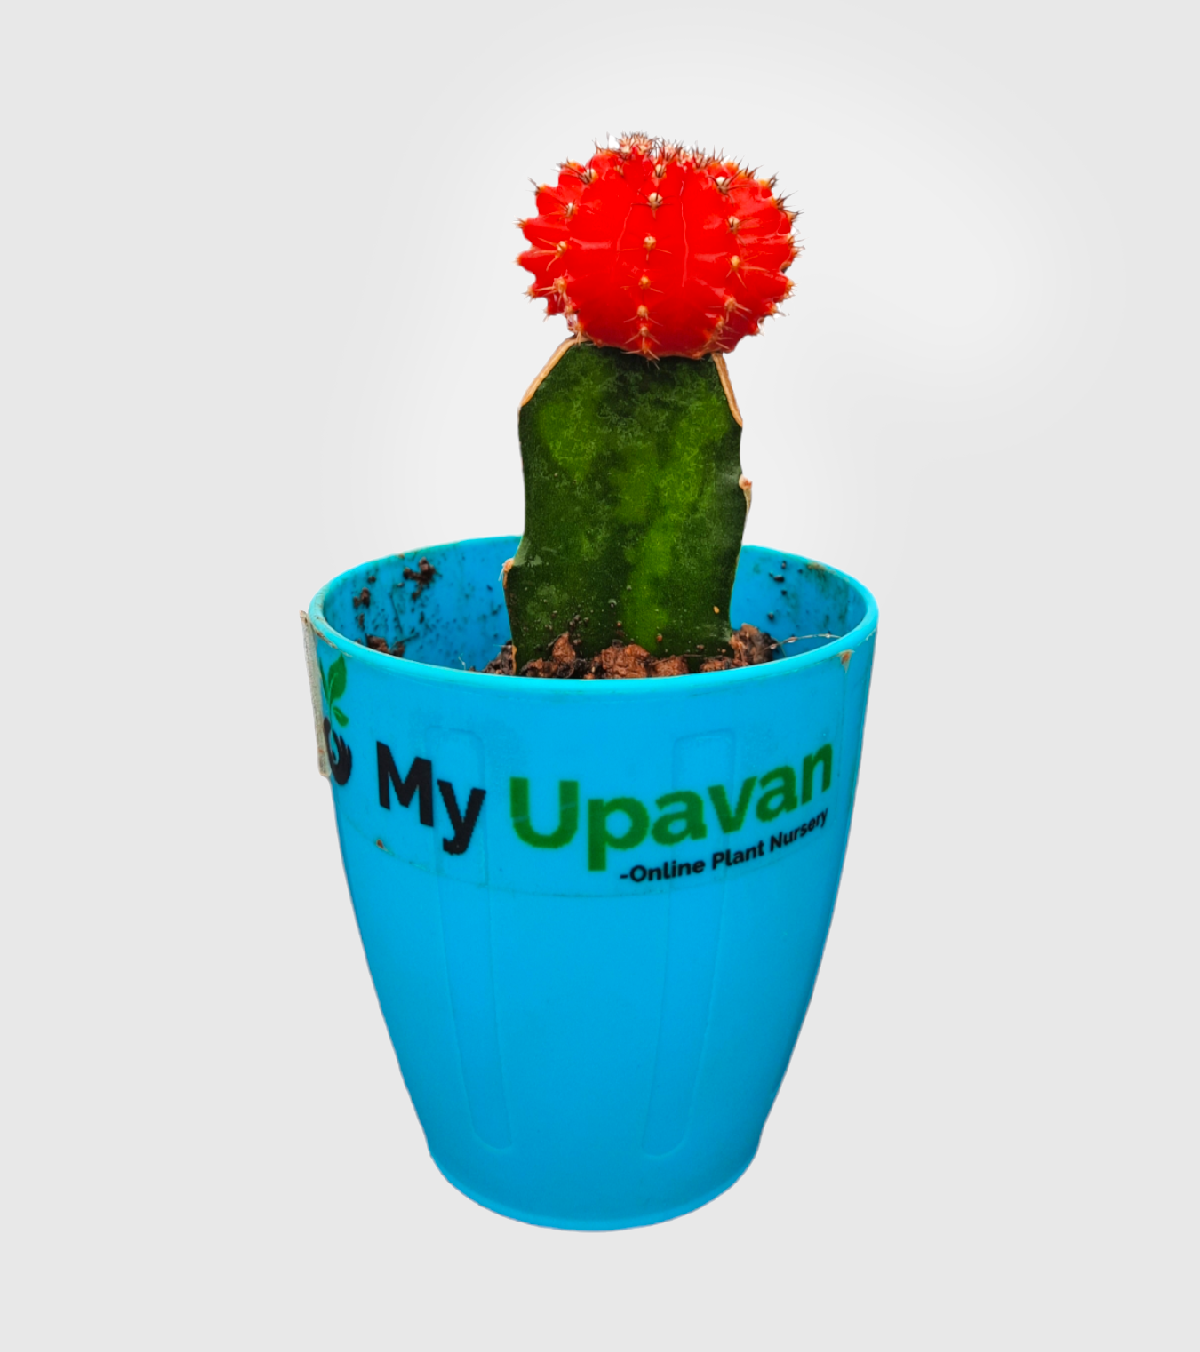 Moon Cactus Red